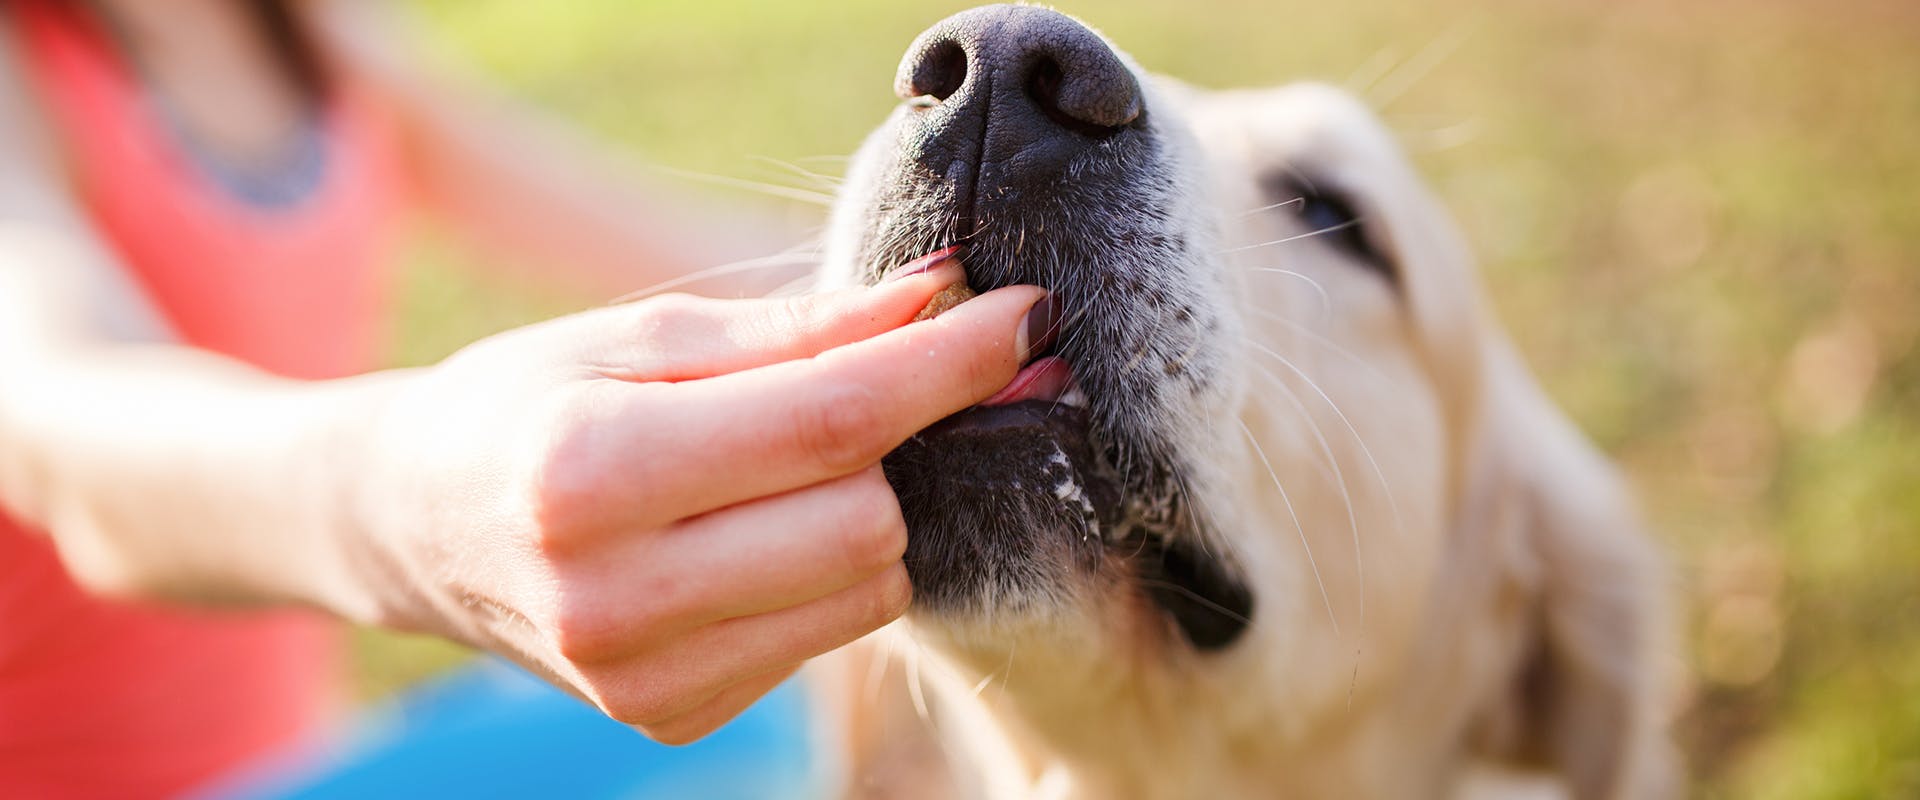 How to show your dog you love them: a hand giving a dog a treat